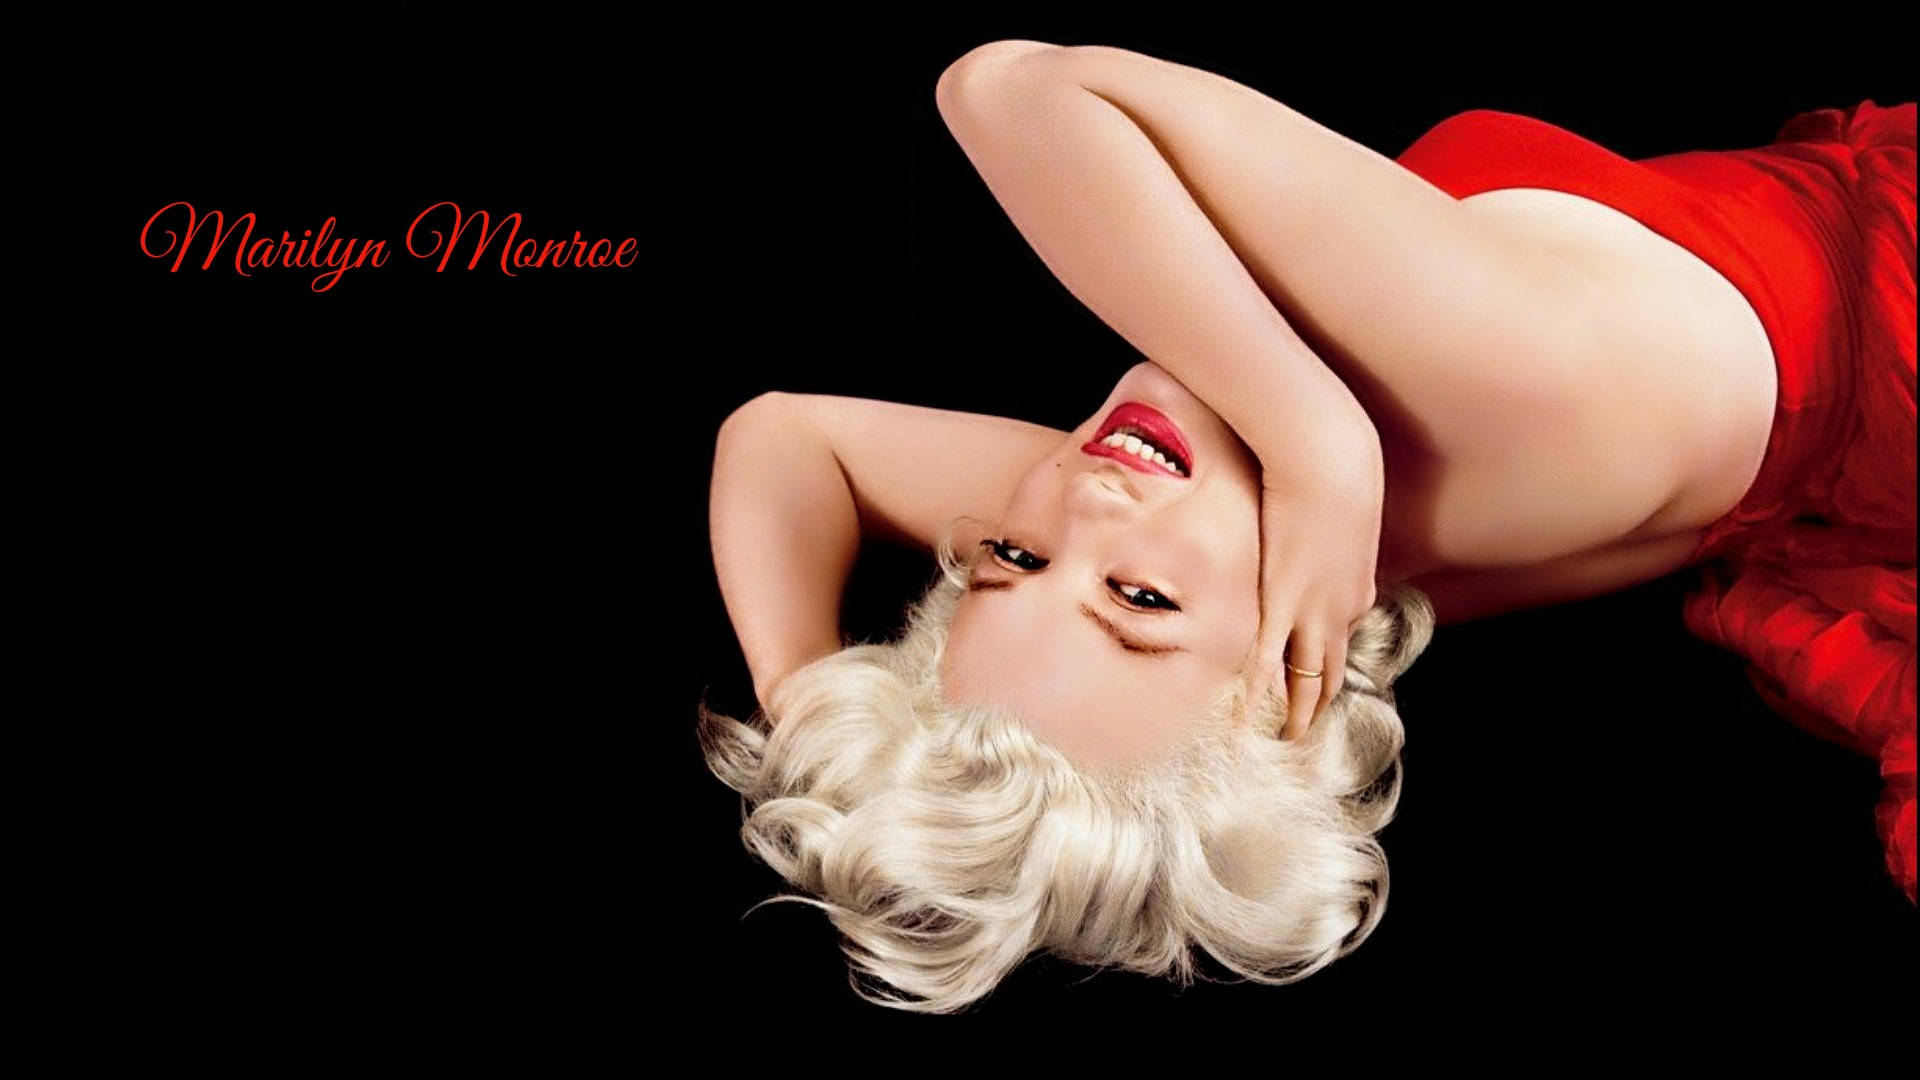 Seductive Marilyn Monroe In Red Dress Background